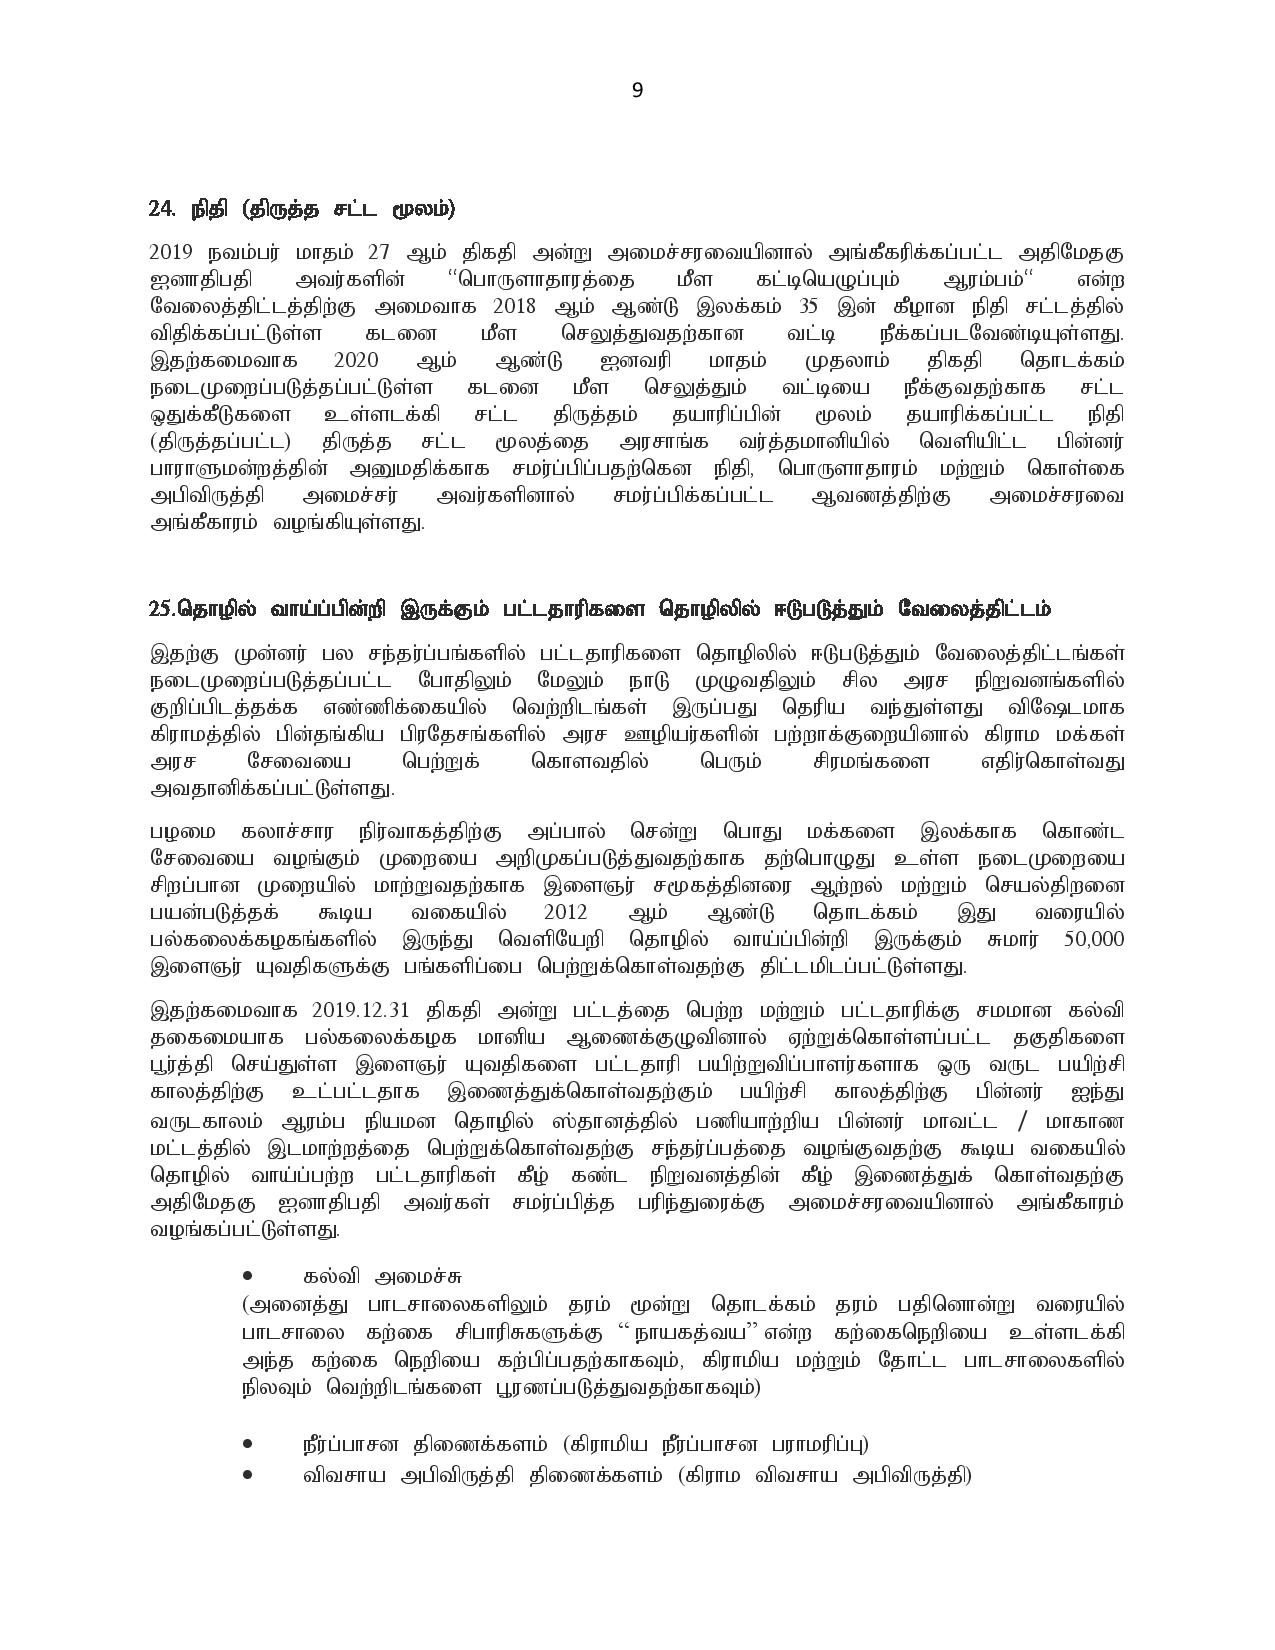 05.02.2020 Cabinet Tamil page 009